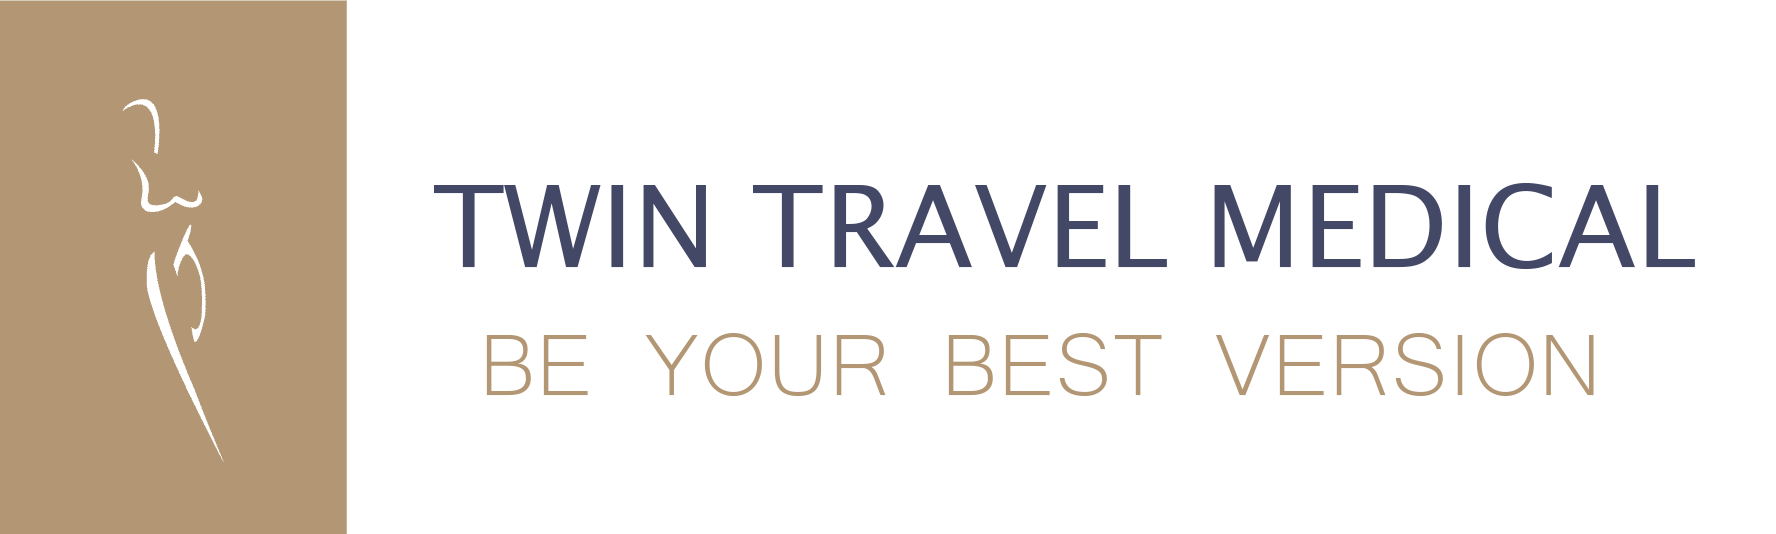 TWIN TRAVEL MEDICAL